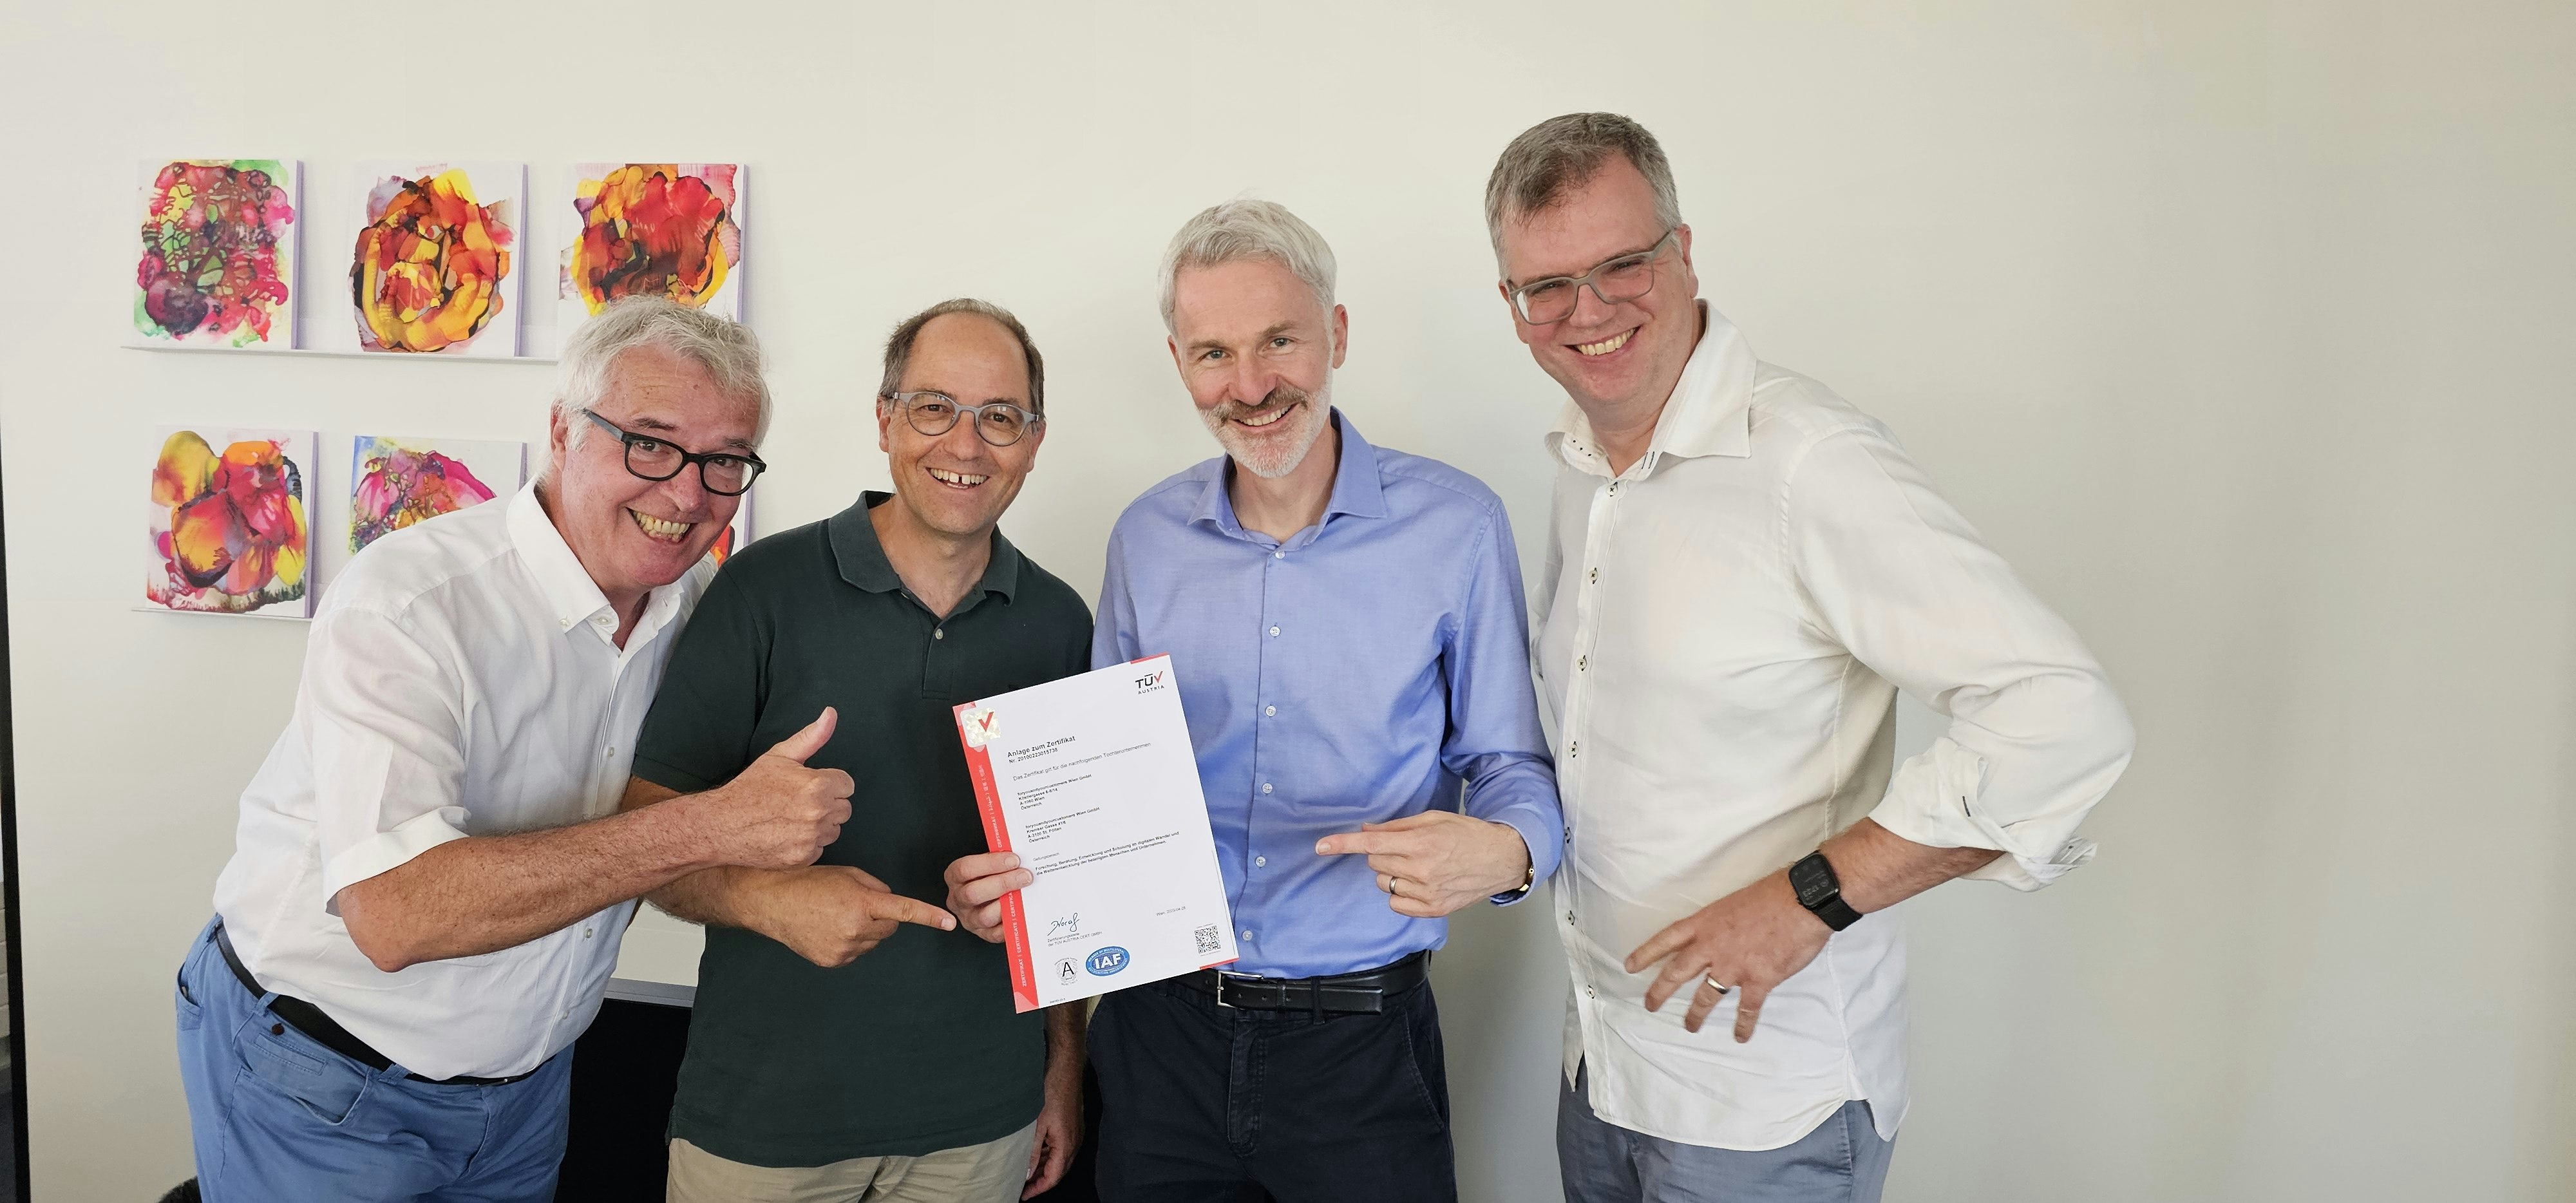 André Mahler and the tree founders celebrate the certificate